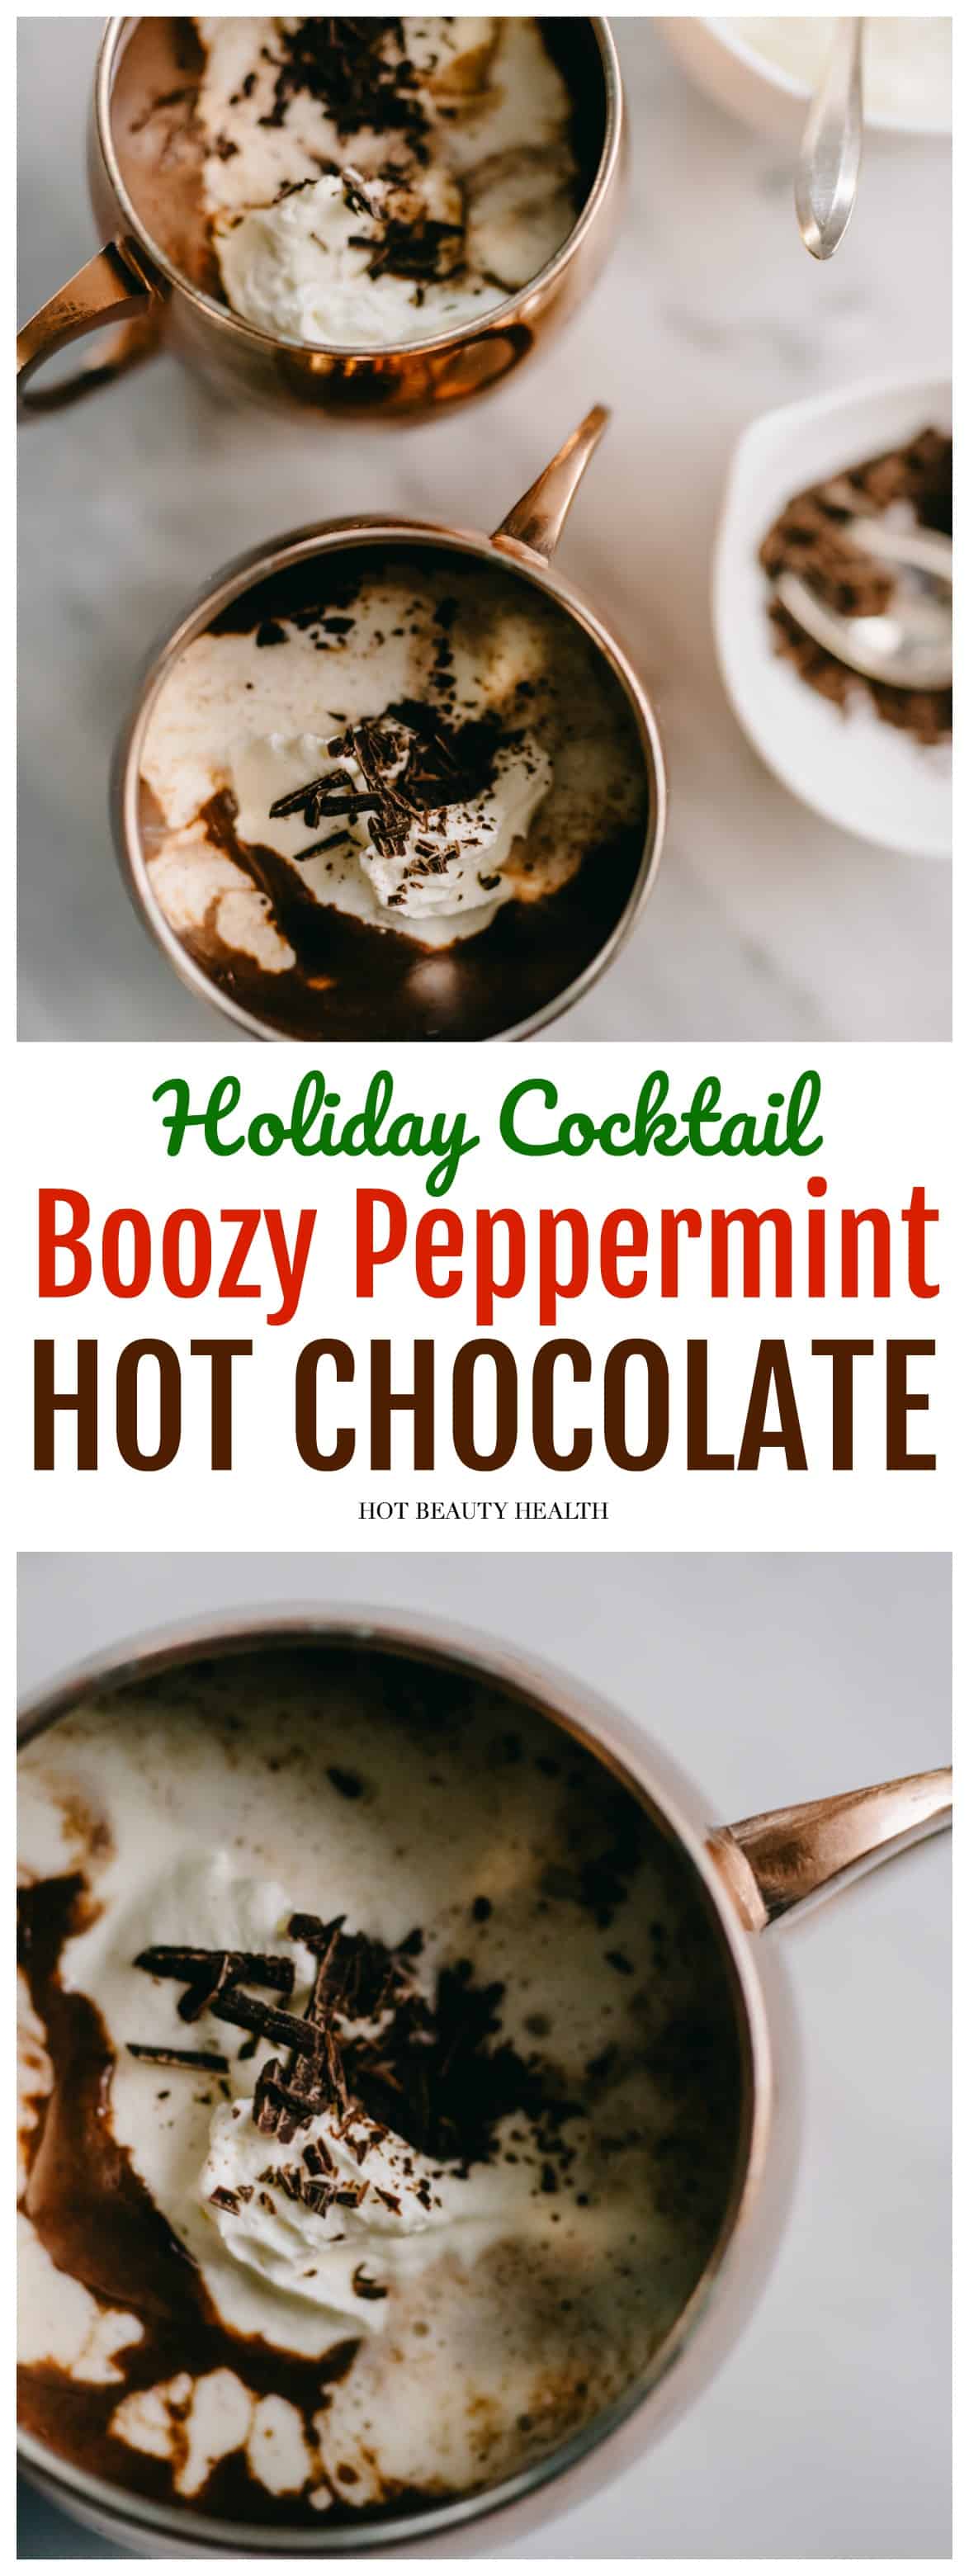 Looking for holiday drink ideas that are alcoholic and will warm you and your guests up from the inside out? This bourbon peppermint hot chocolate recipe is so simple and delicious and makes the perfect post-dinner cocktail for Thanksgiving and Christmas. Click pin to make this easy homemade holiday drink!